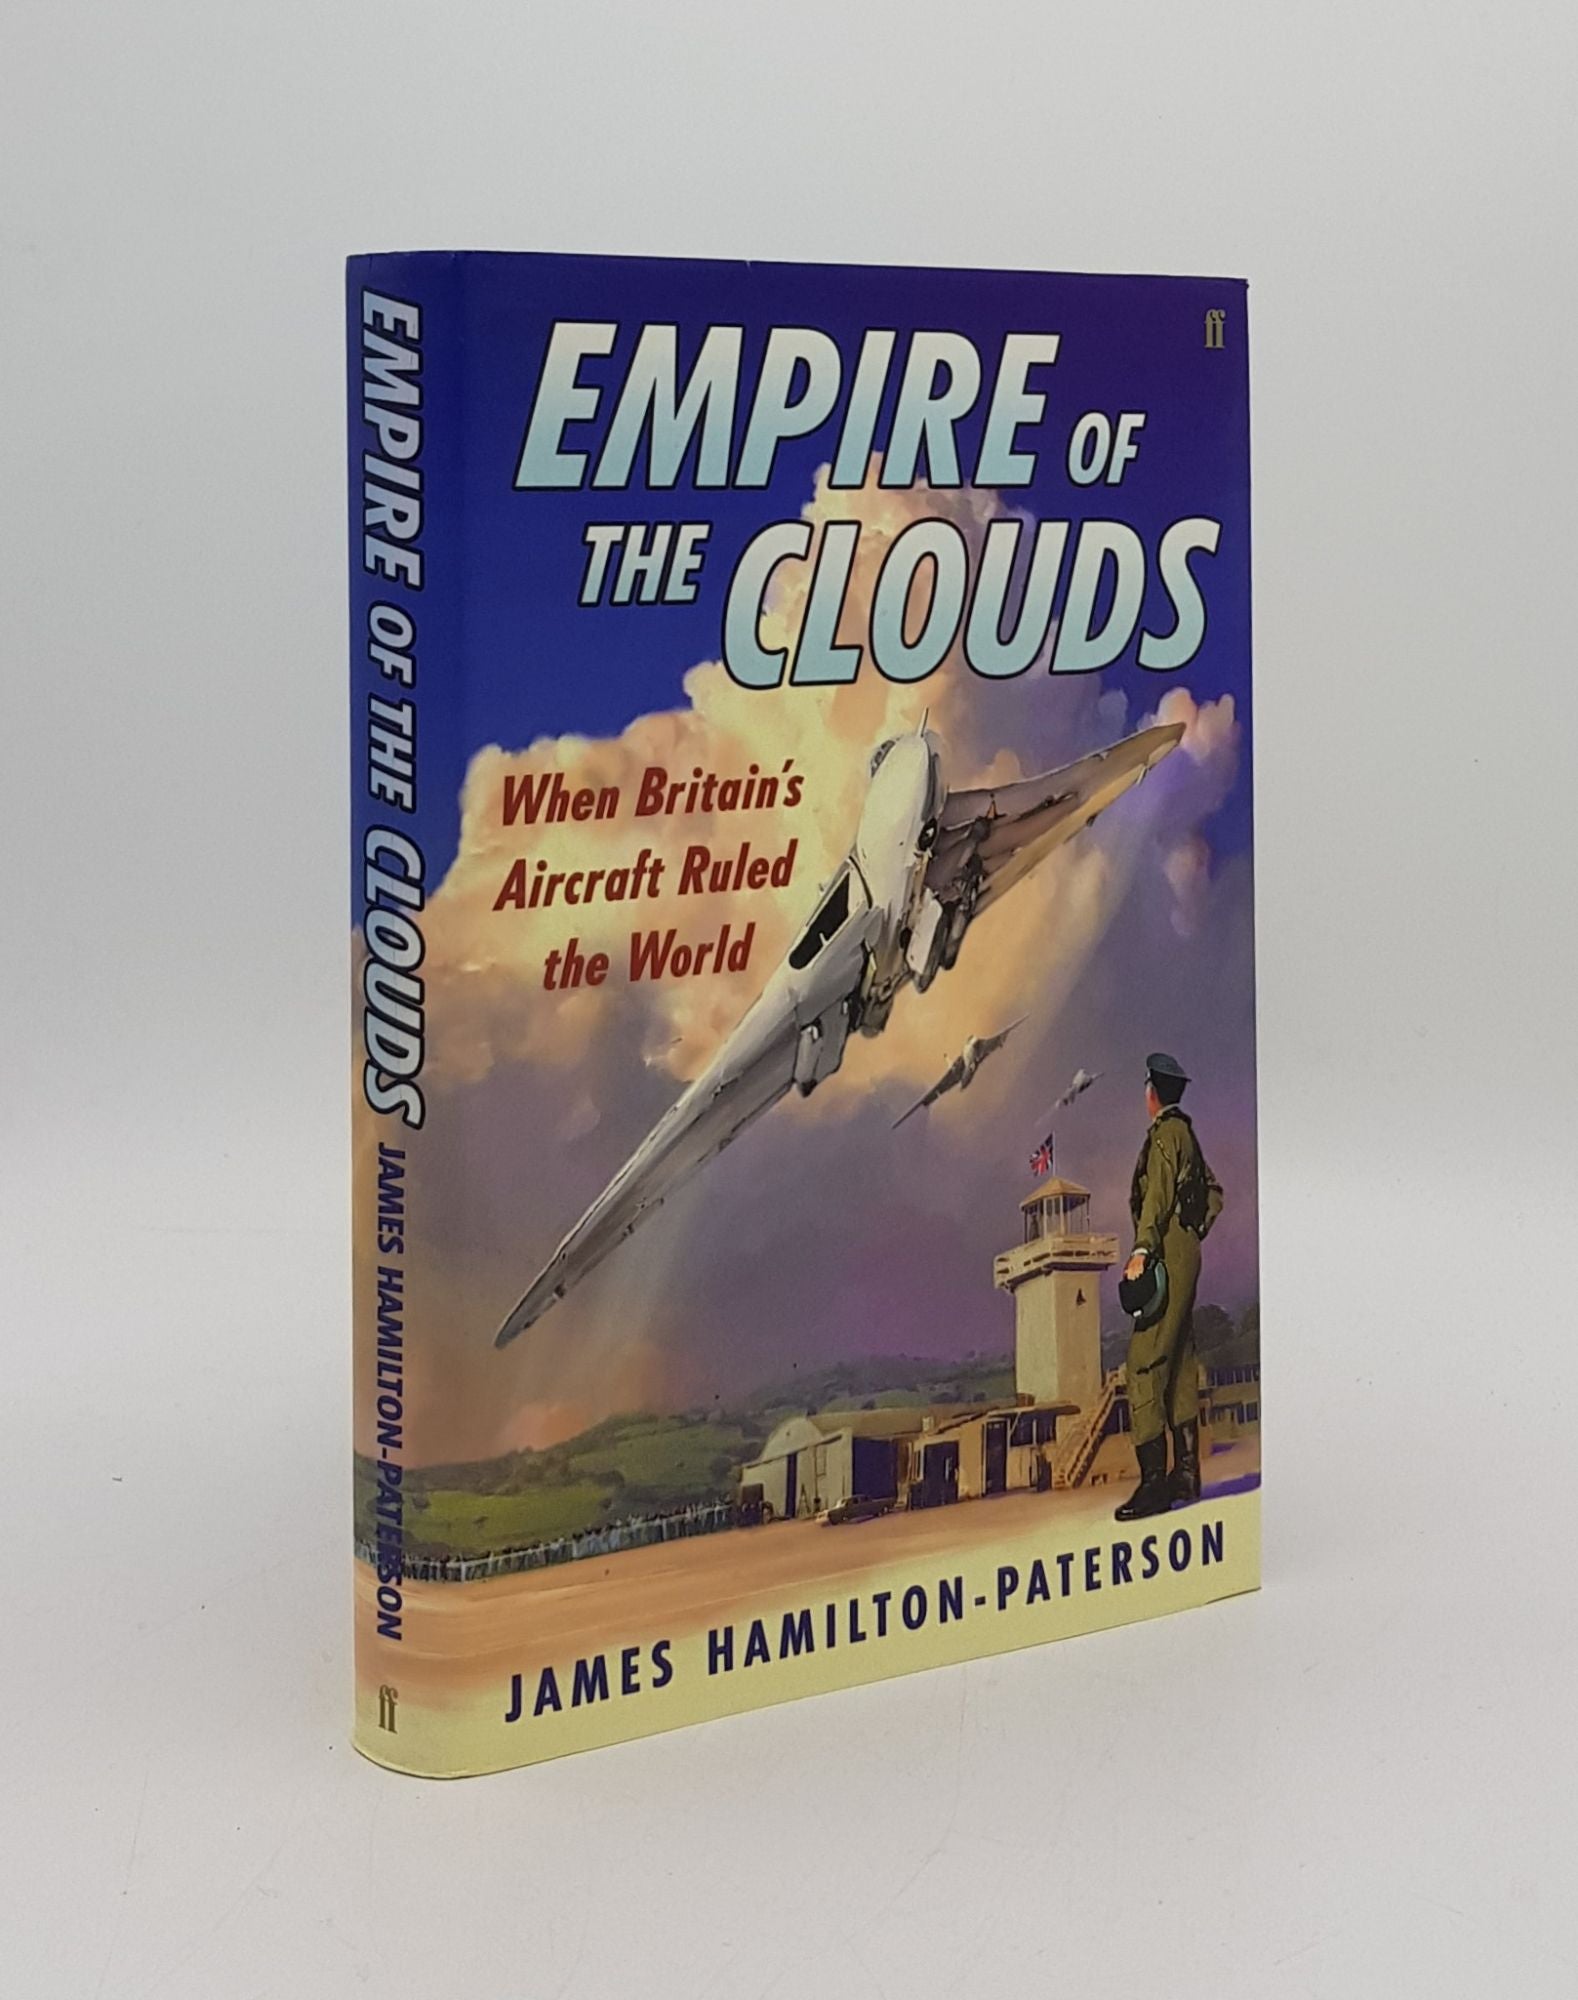 HAMILTON-PATERSON James - Empire of the Clouds When Britain's Aircraft Ruled the World